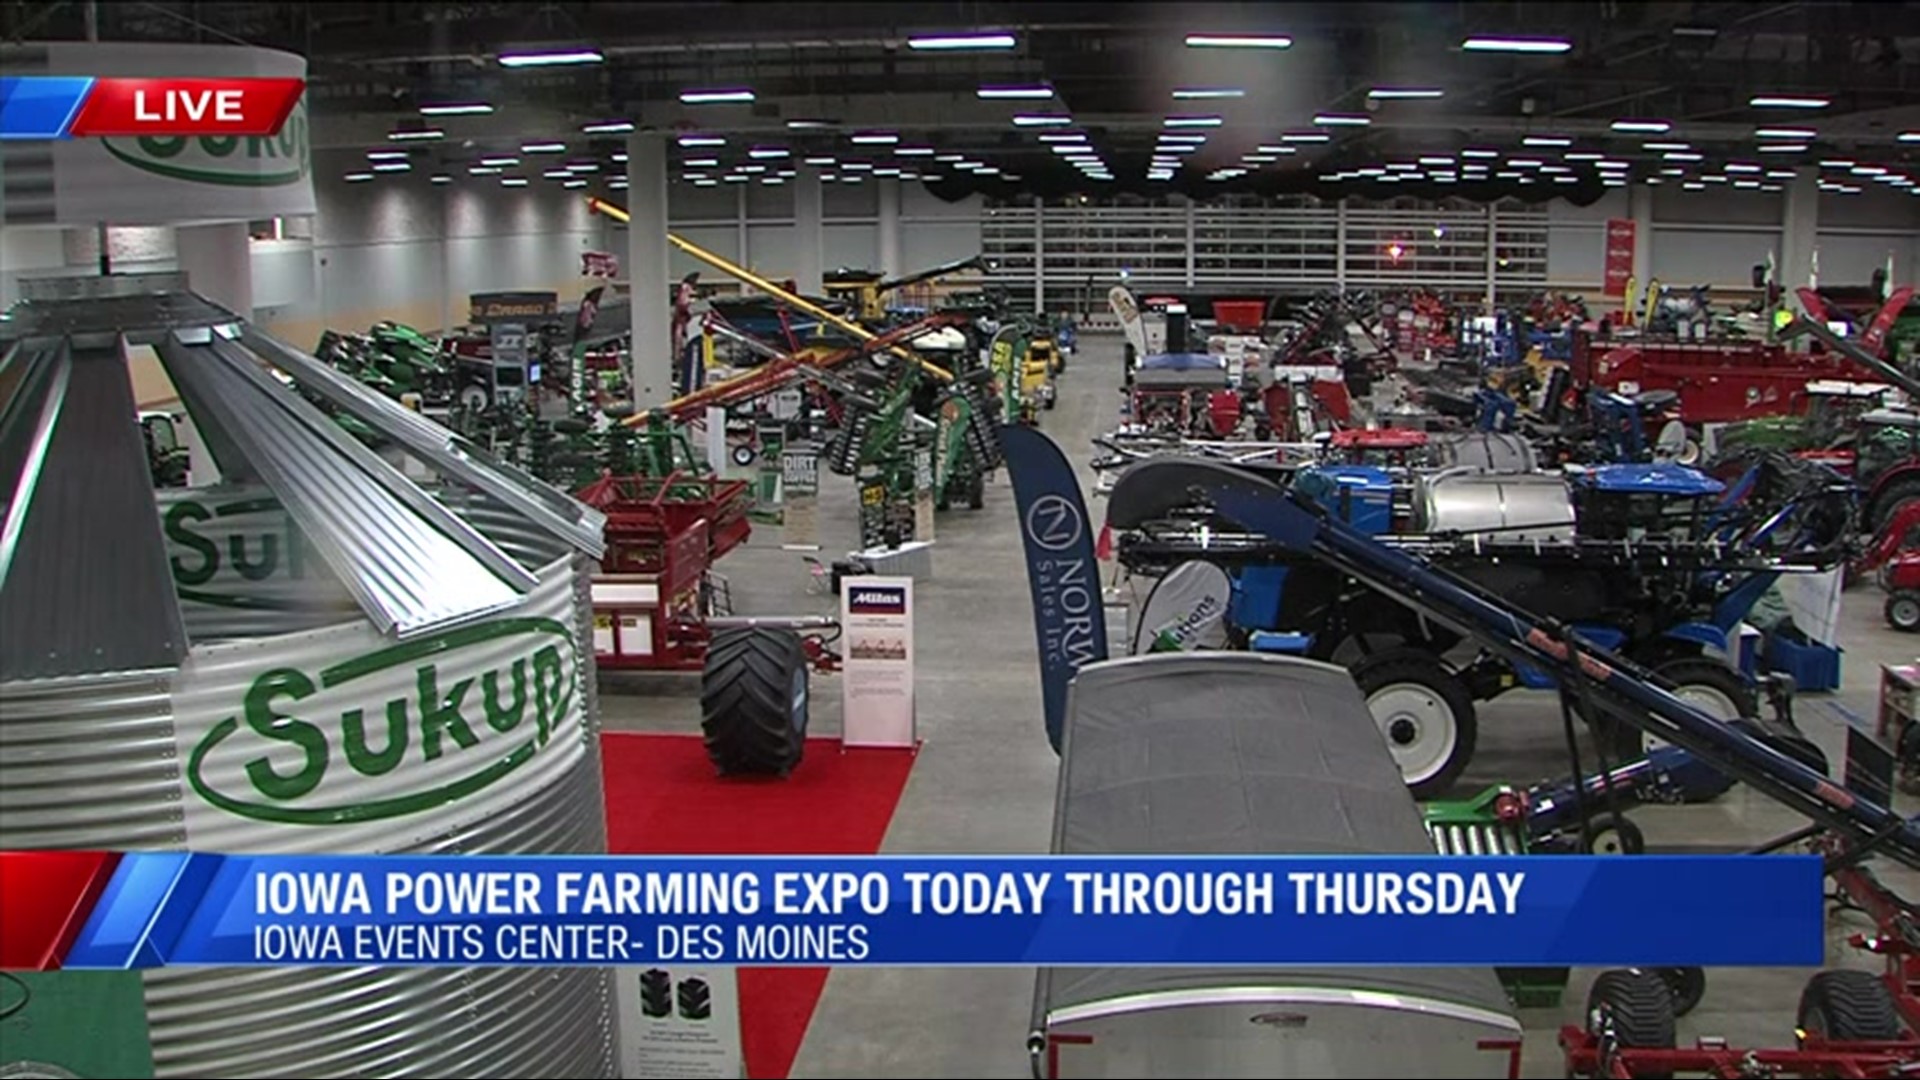 Starting Tuesday, you can check out the latest in farm equipment, electronics, and precision agriculture as the Iowa Power Farming Show returns to the Iowa Event Center.